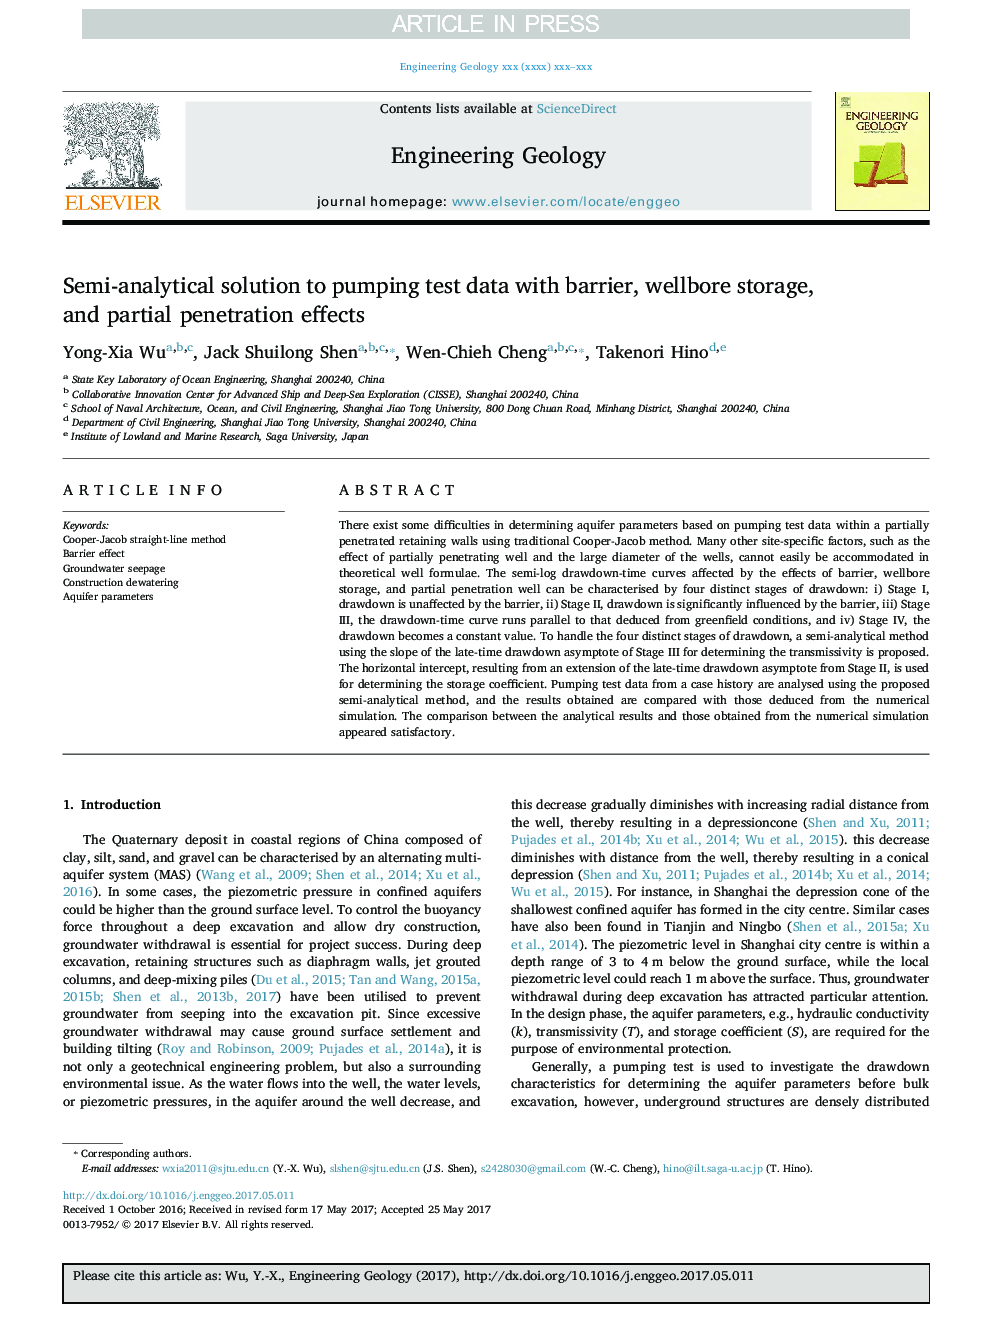 Semi-analytical solution to pumping test data with barrier, wellbore storage, and partial penetration effects